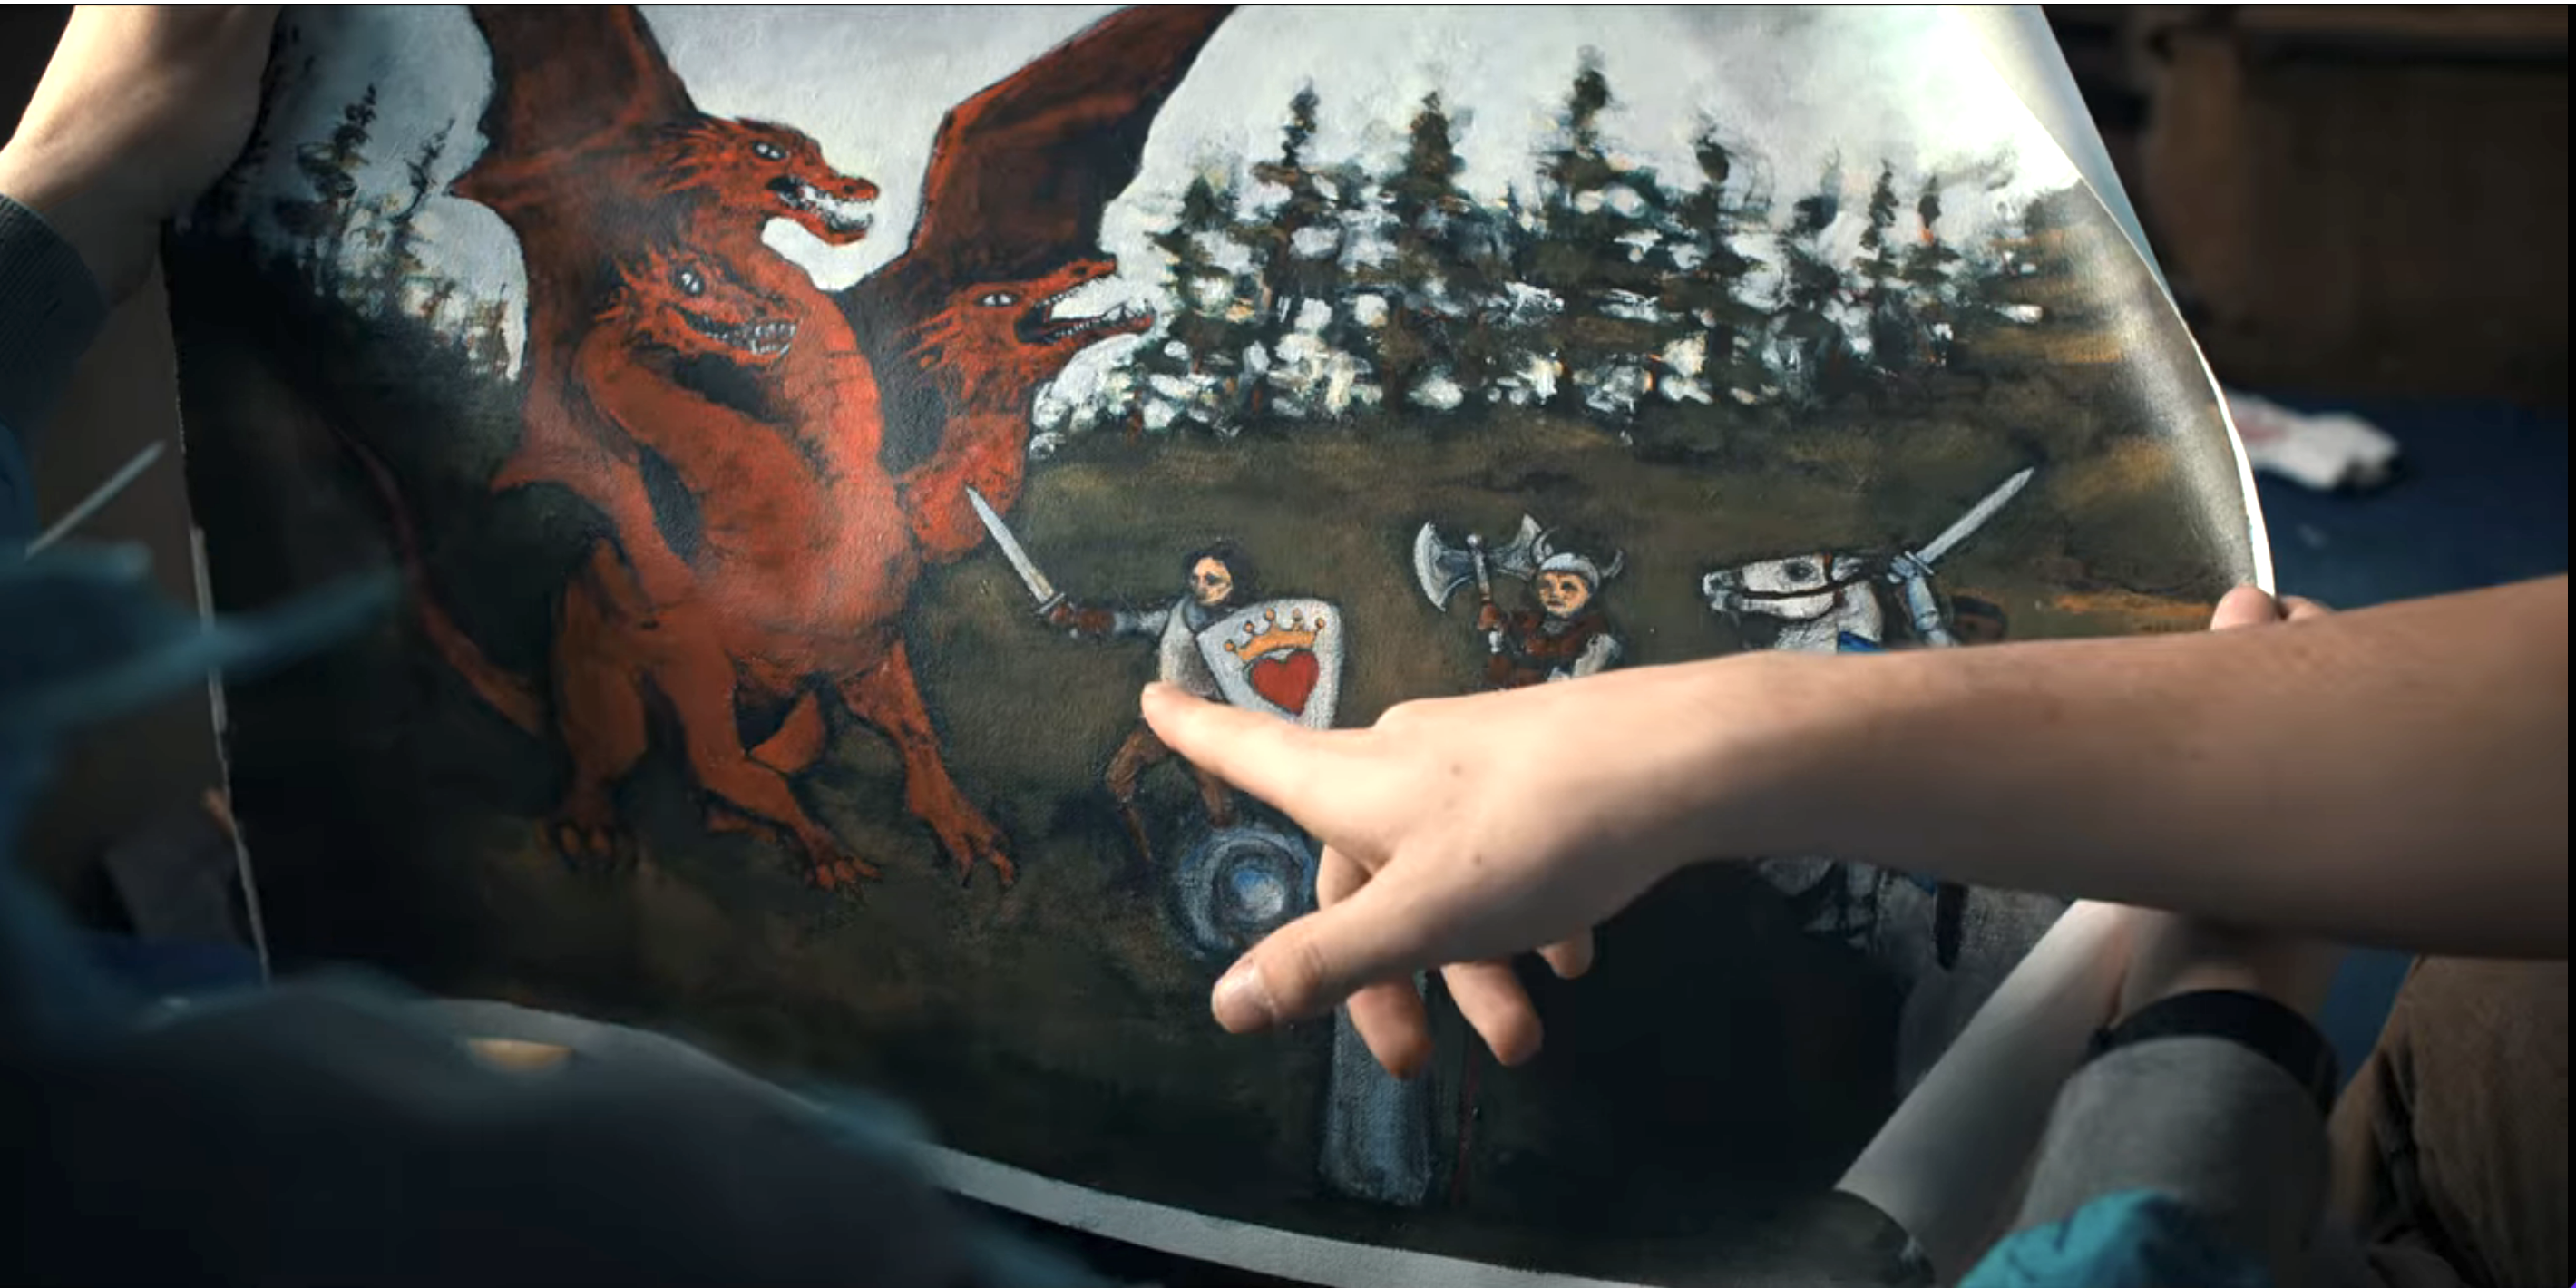 someone pointing to the dragon in the painting